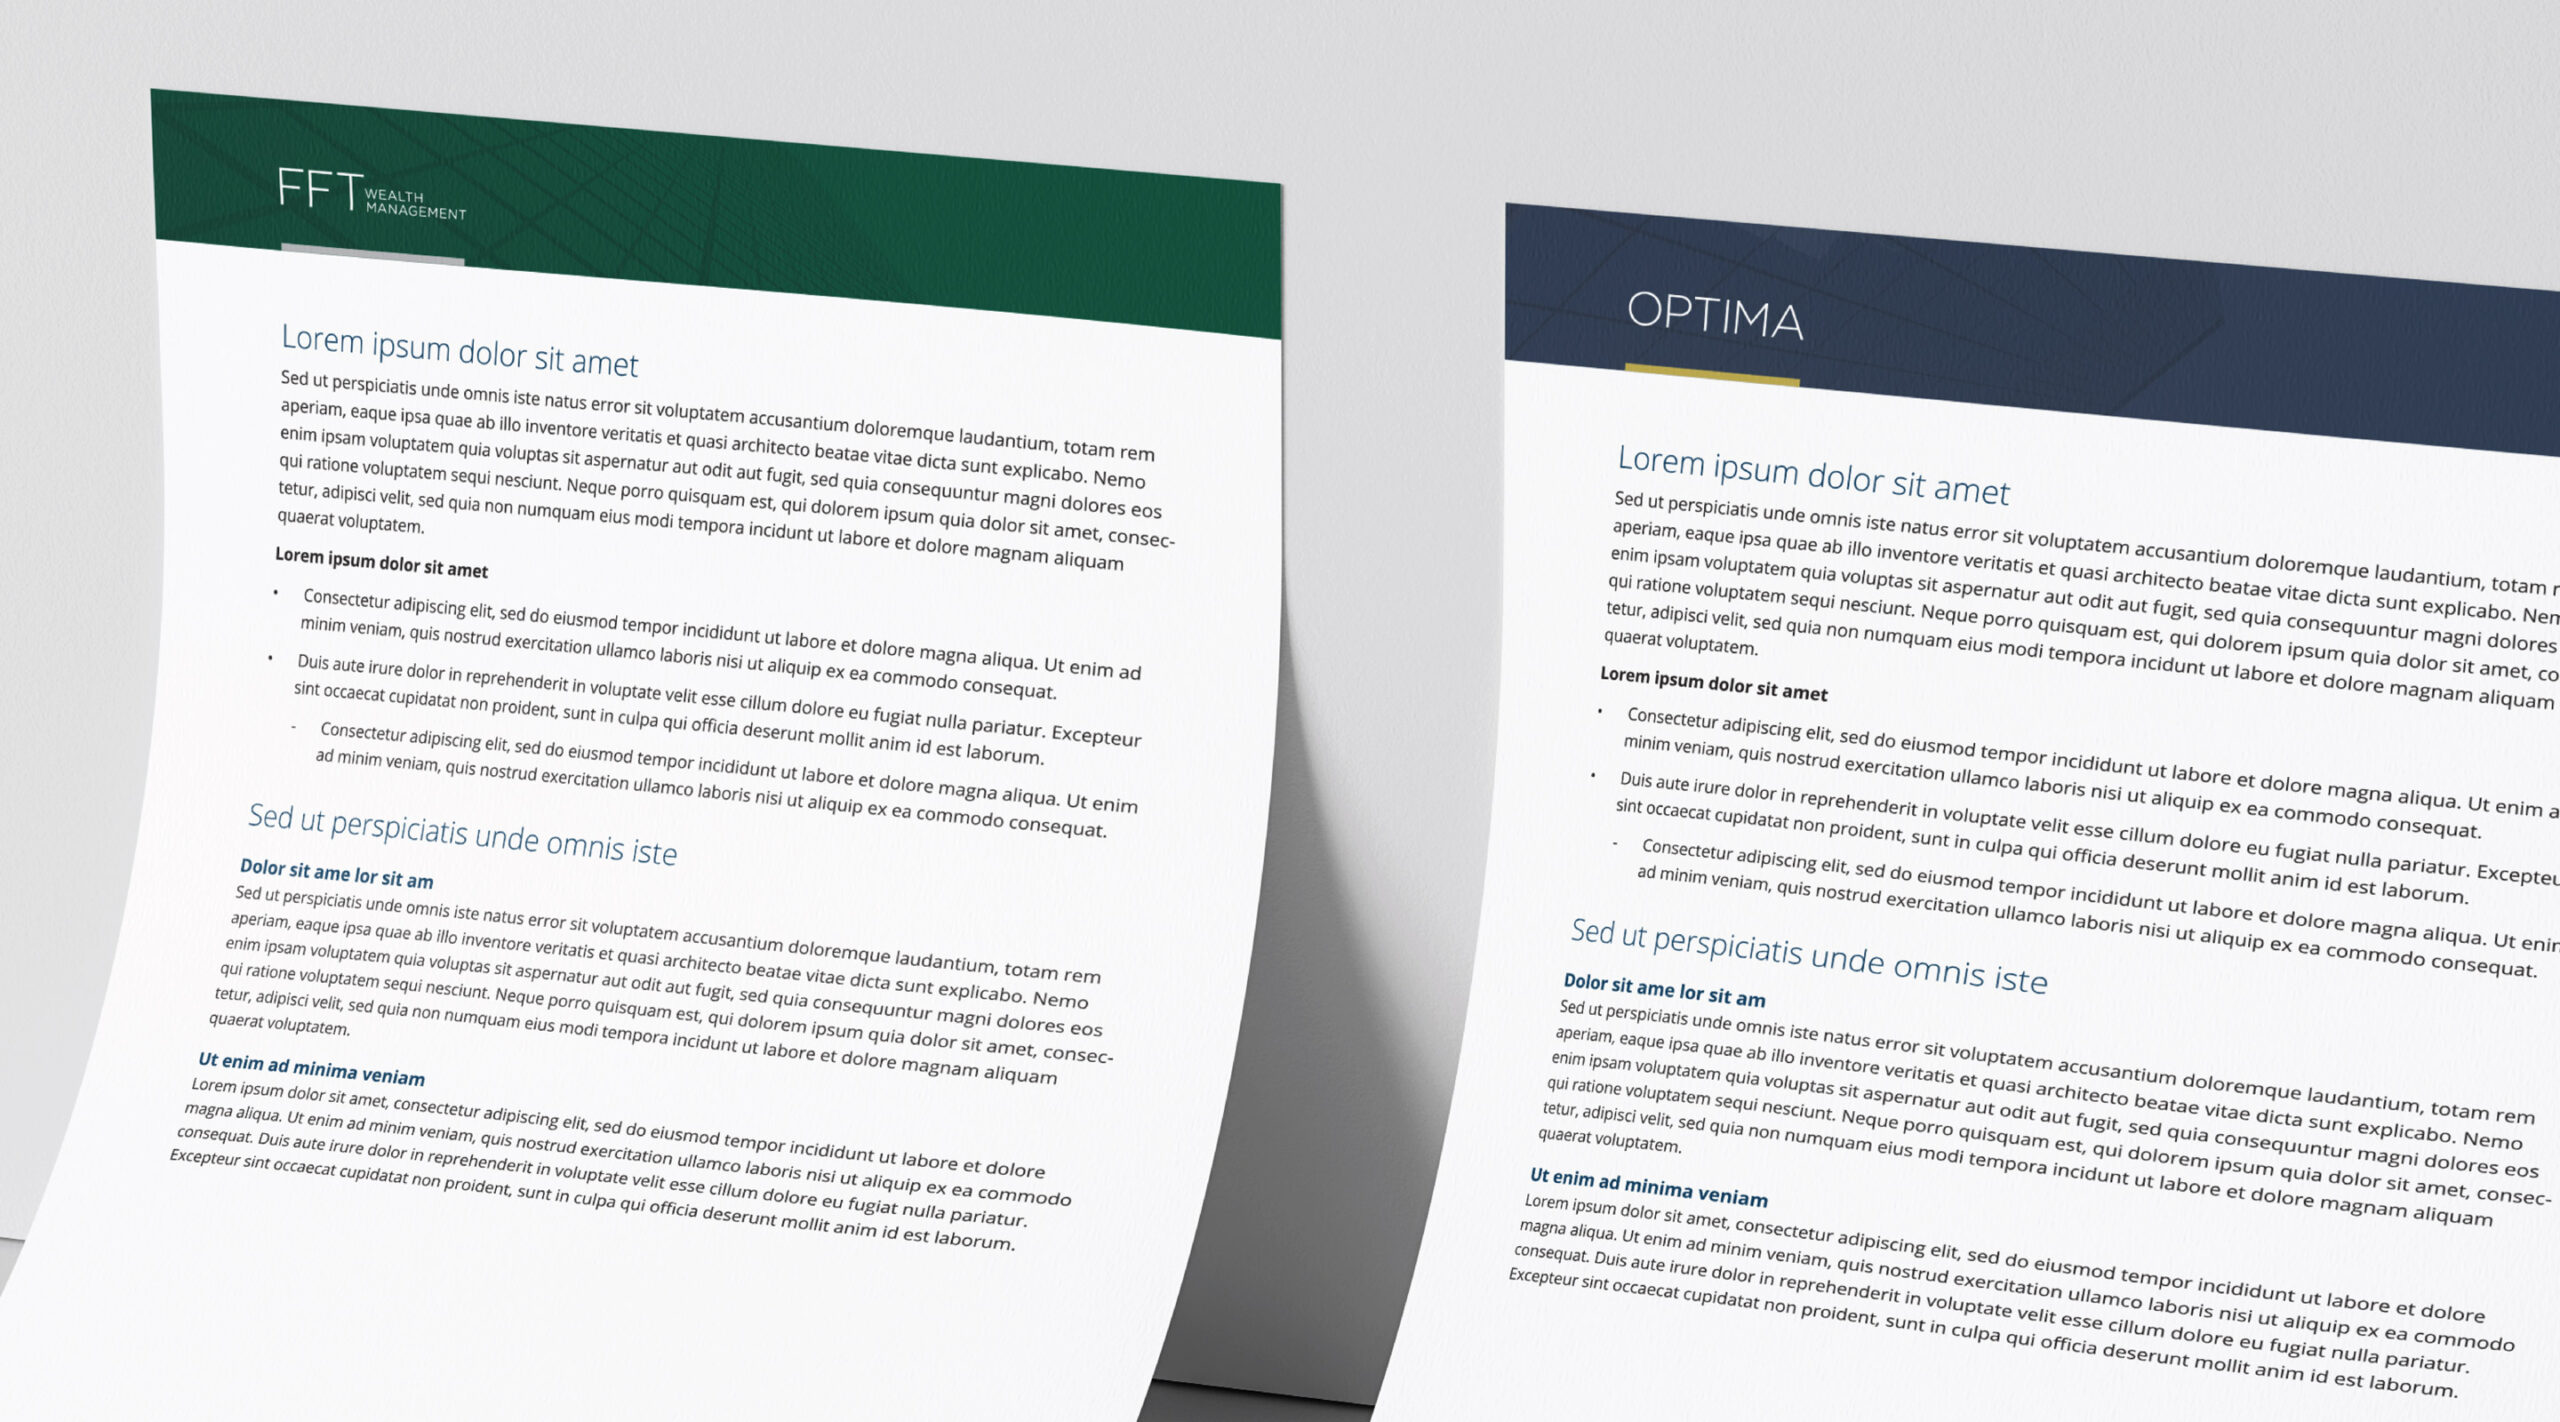 FFT Wealth Management and Optima templates